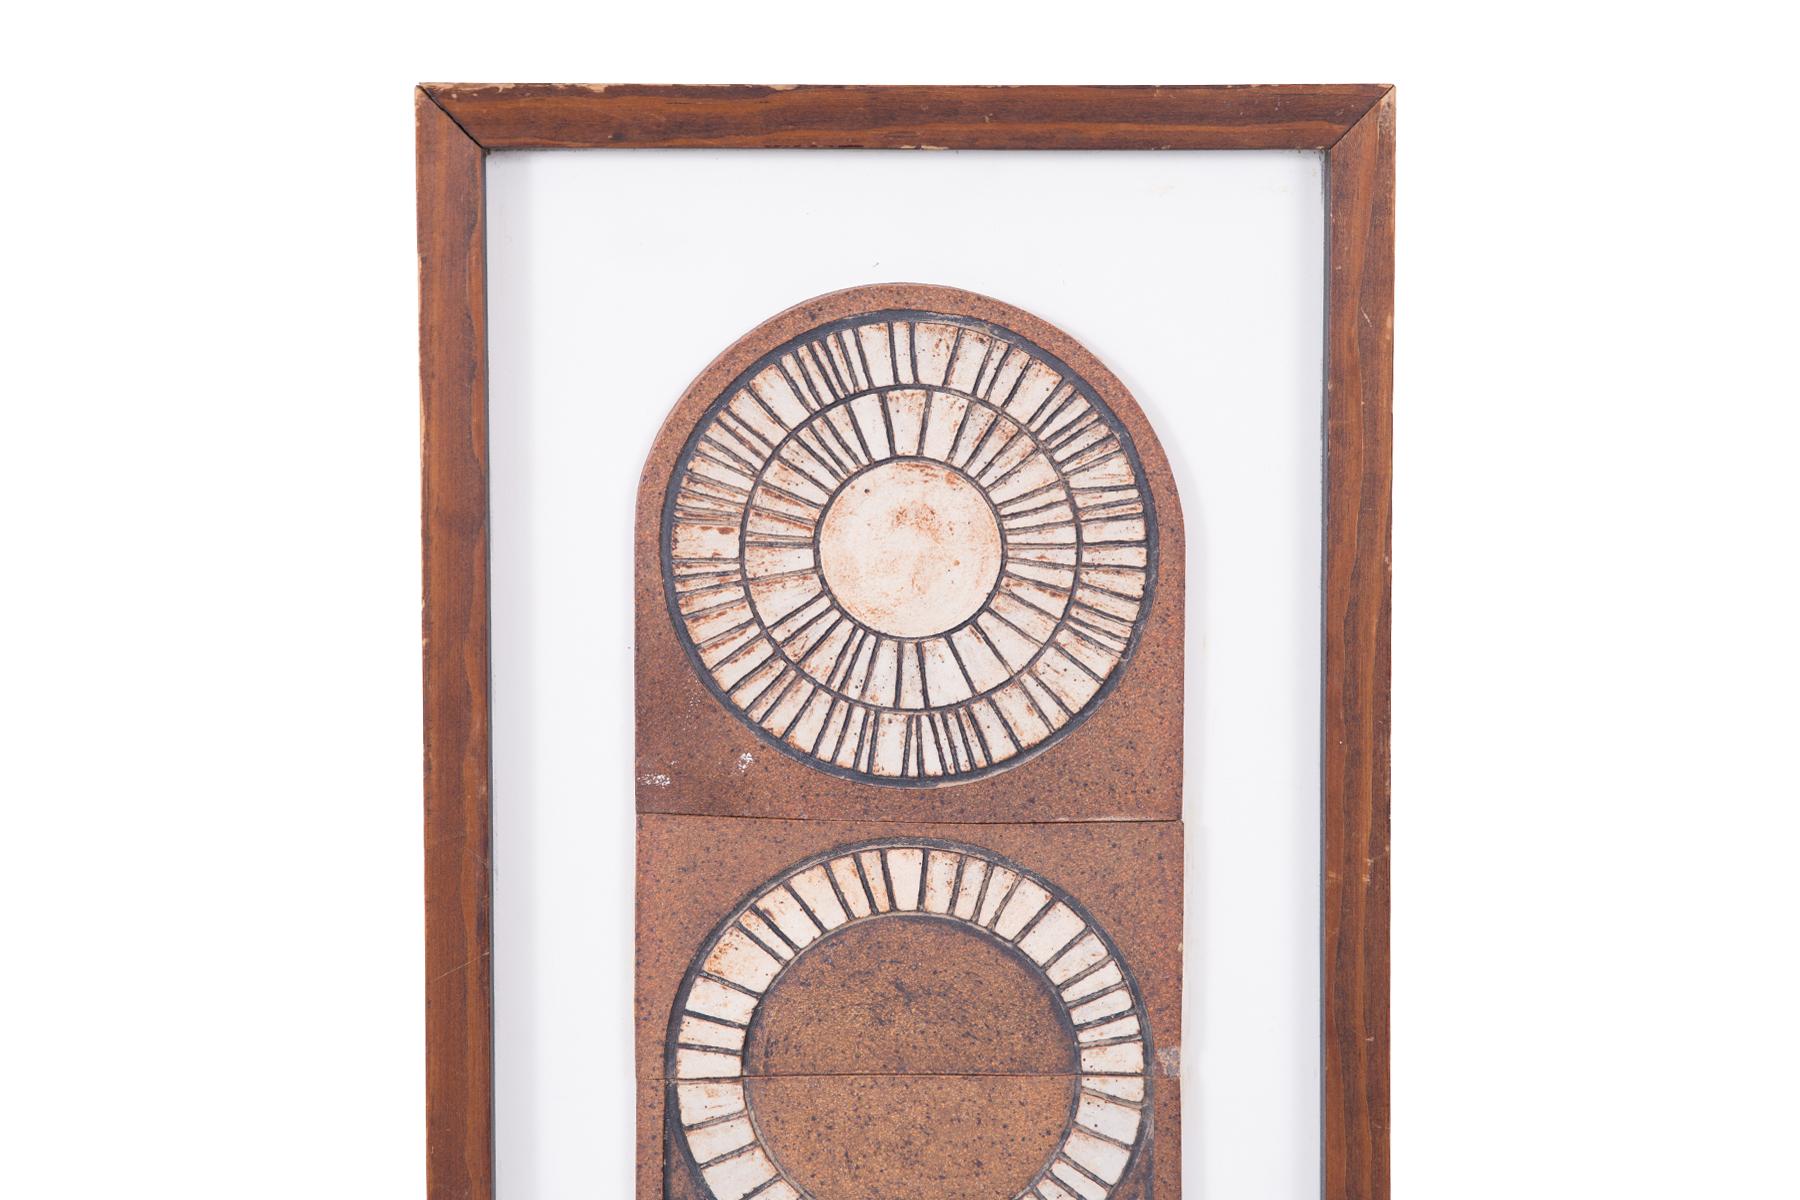 David Cunningham studio framed 1970s ceramic wall piece in white, tan and warm brown tones. The artwork illustrates a sun and sunflower motif. Artwork has David Cunningham Gallery & Studio label on back.